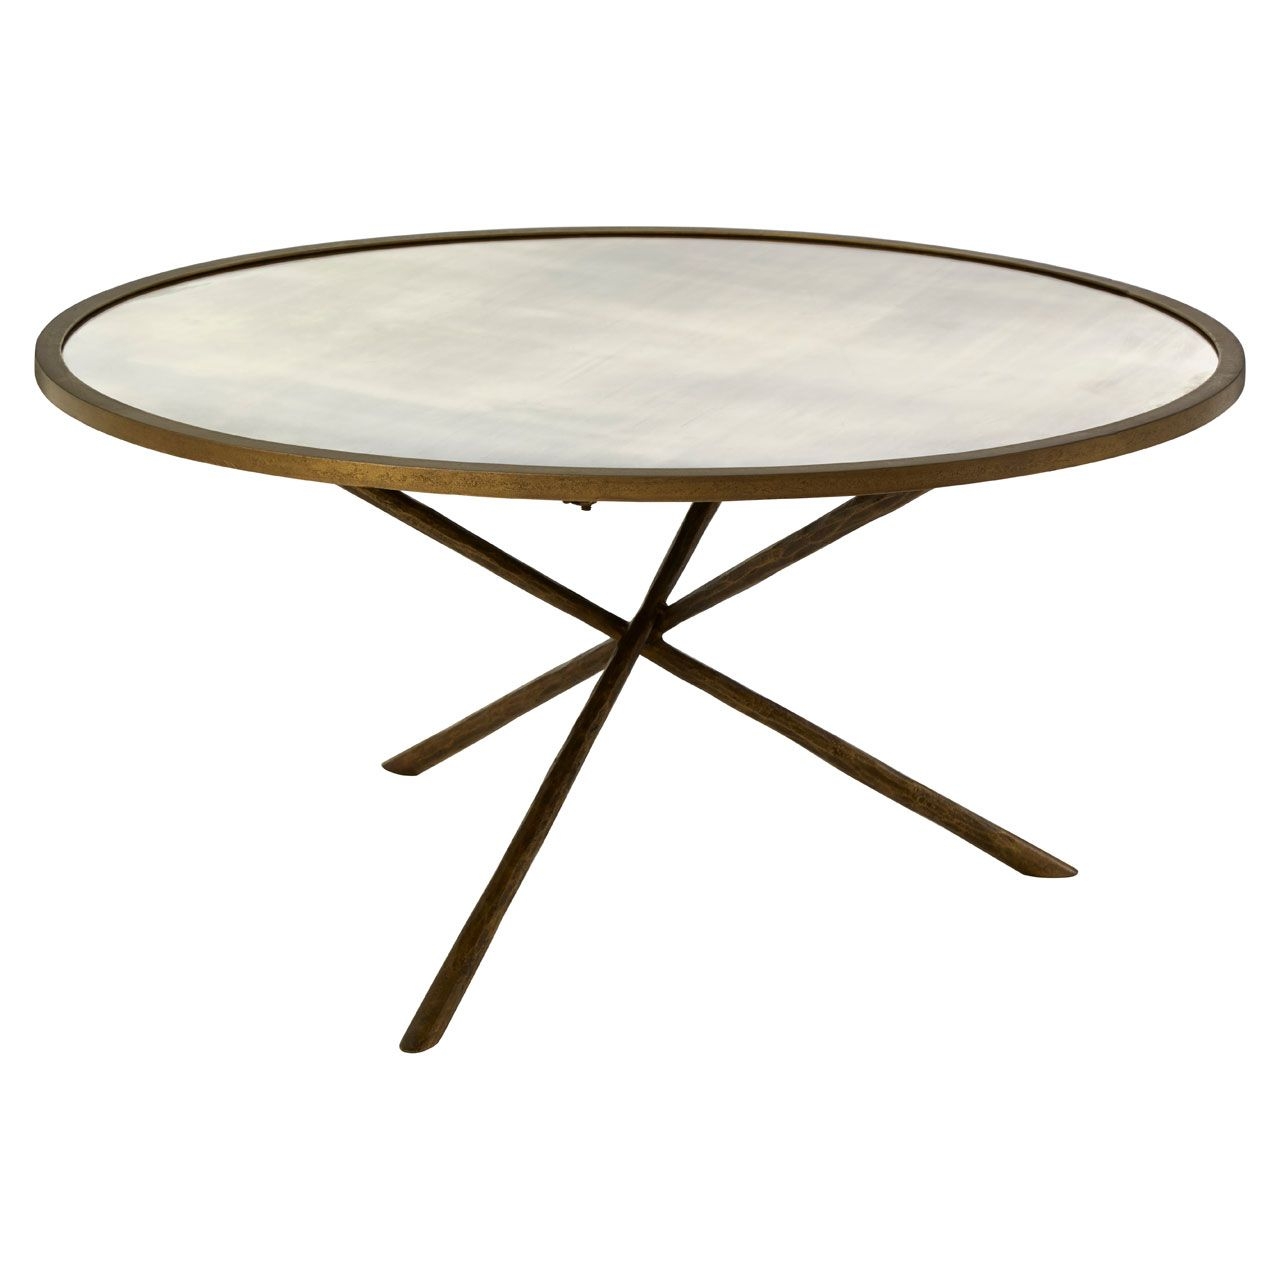 Rany Round Mirrored Glass Coffee Table In Brass